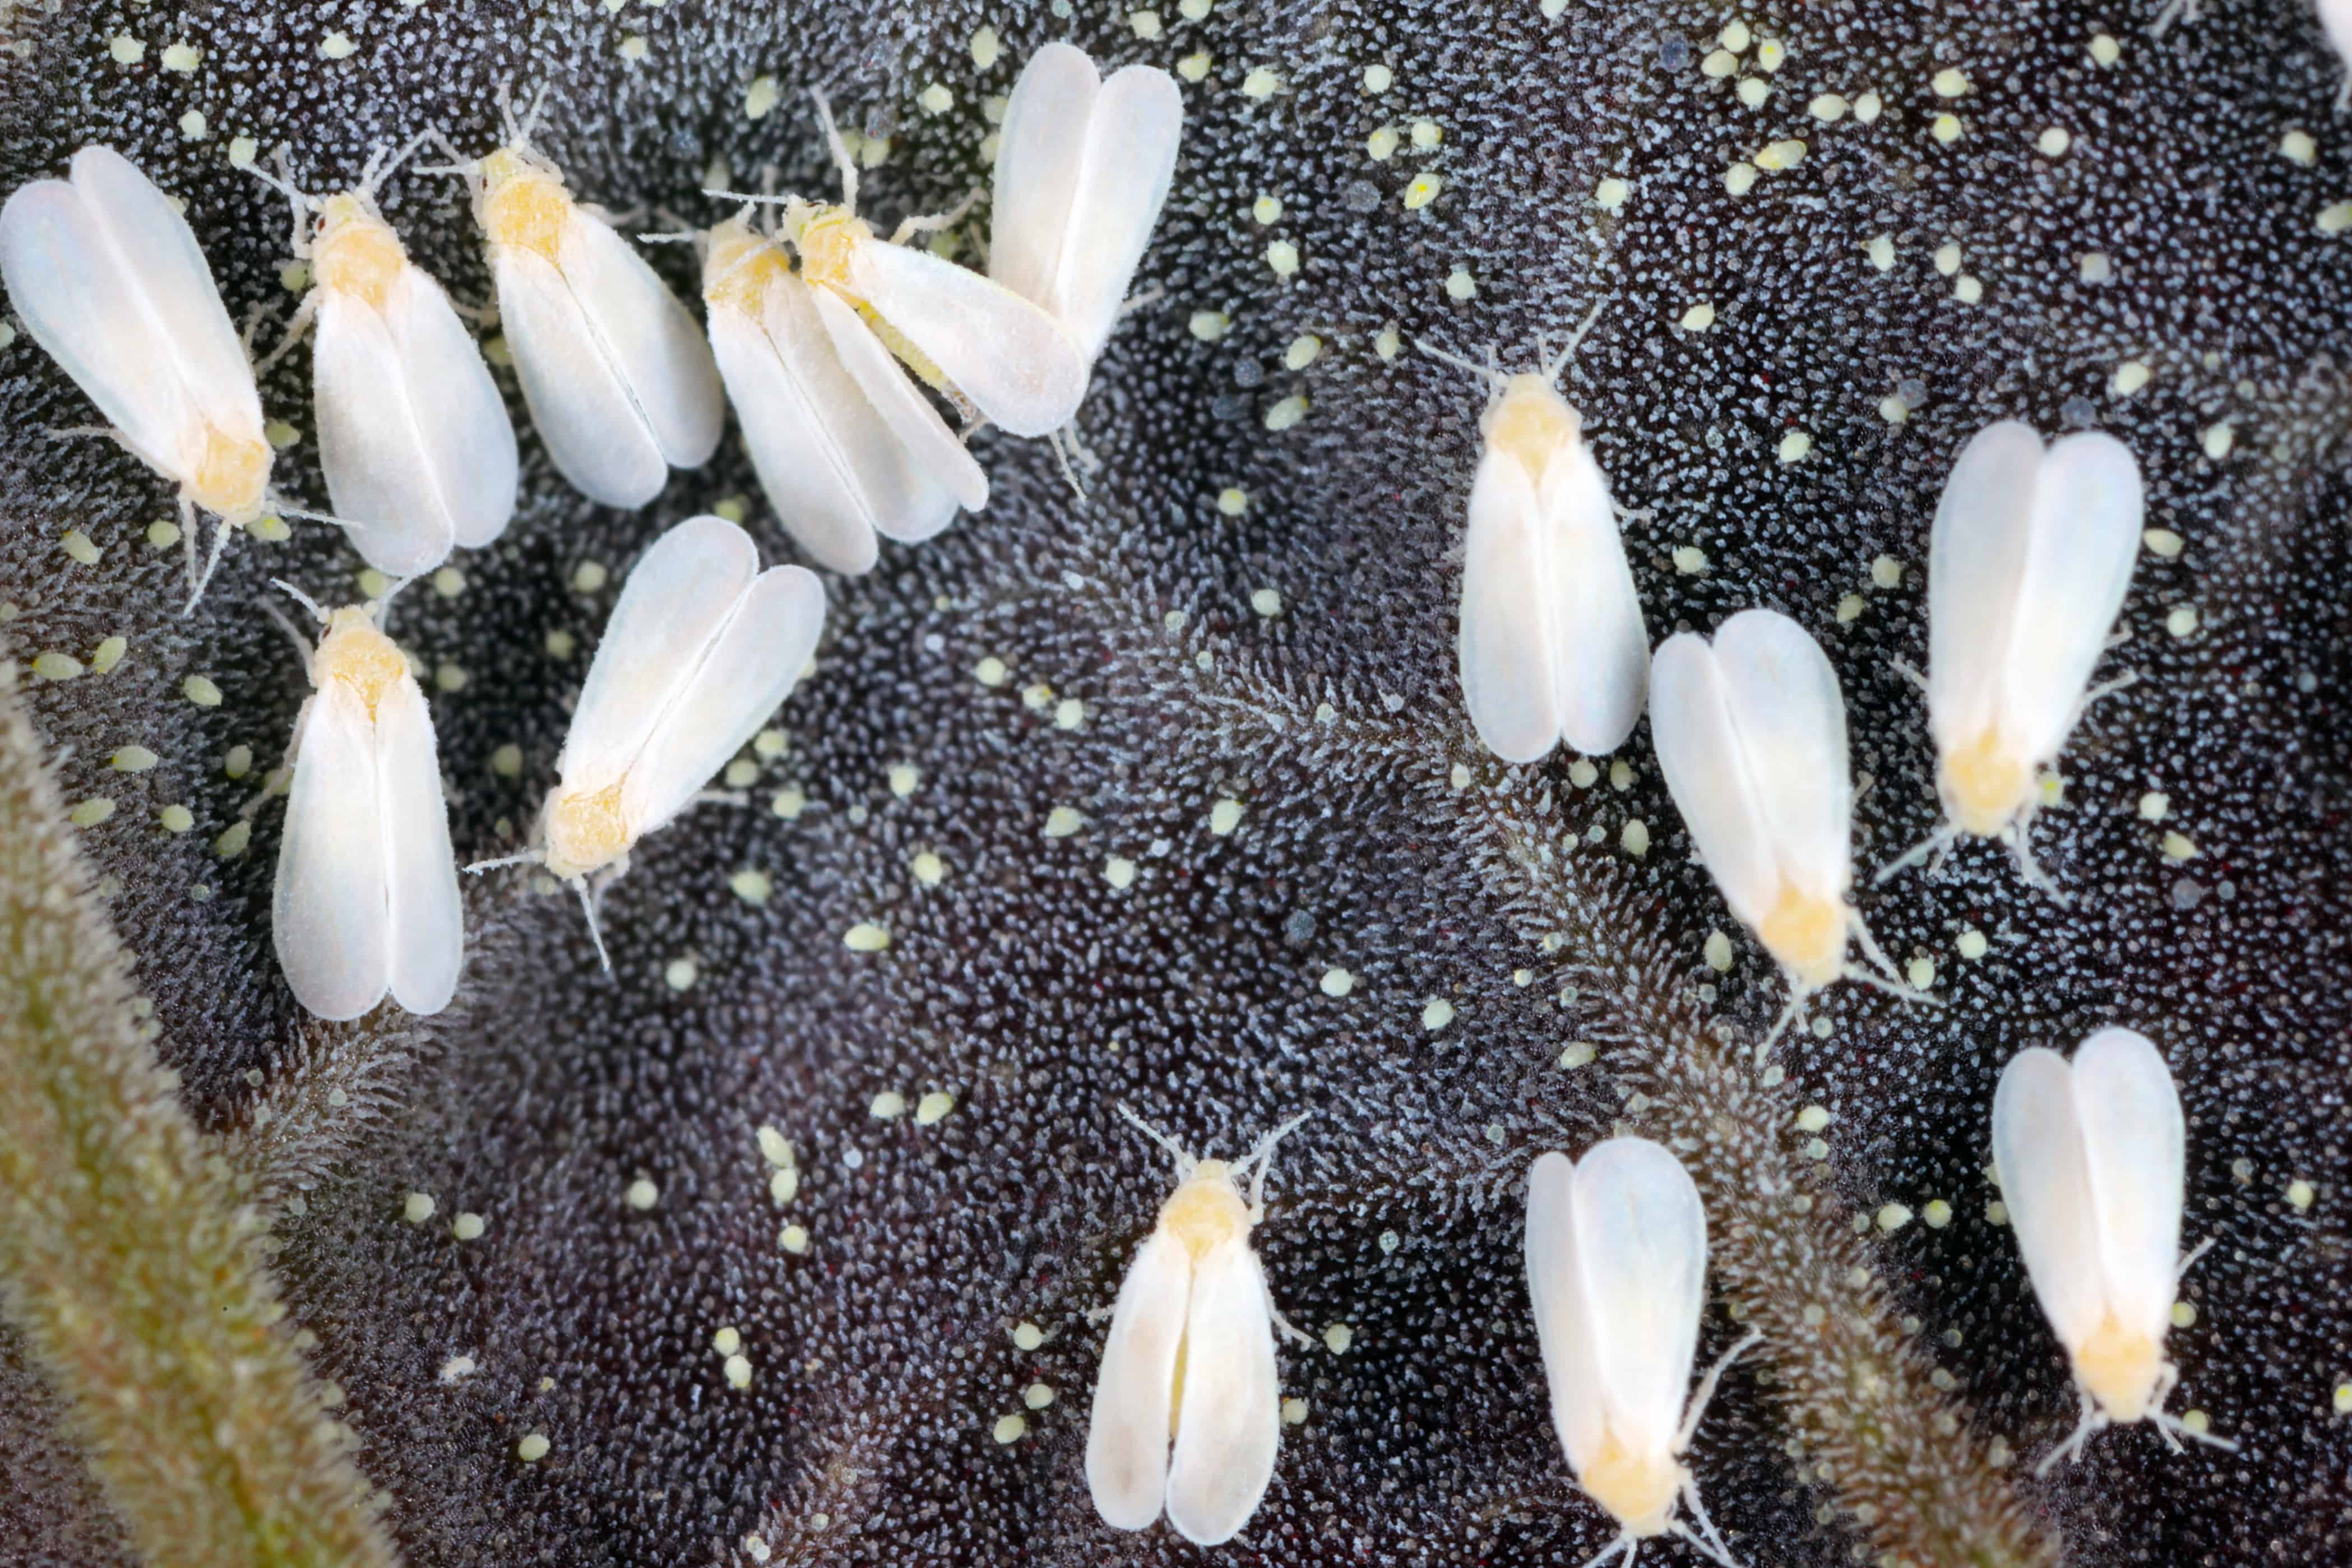 Bunch of whiteflies on a black leaf.